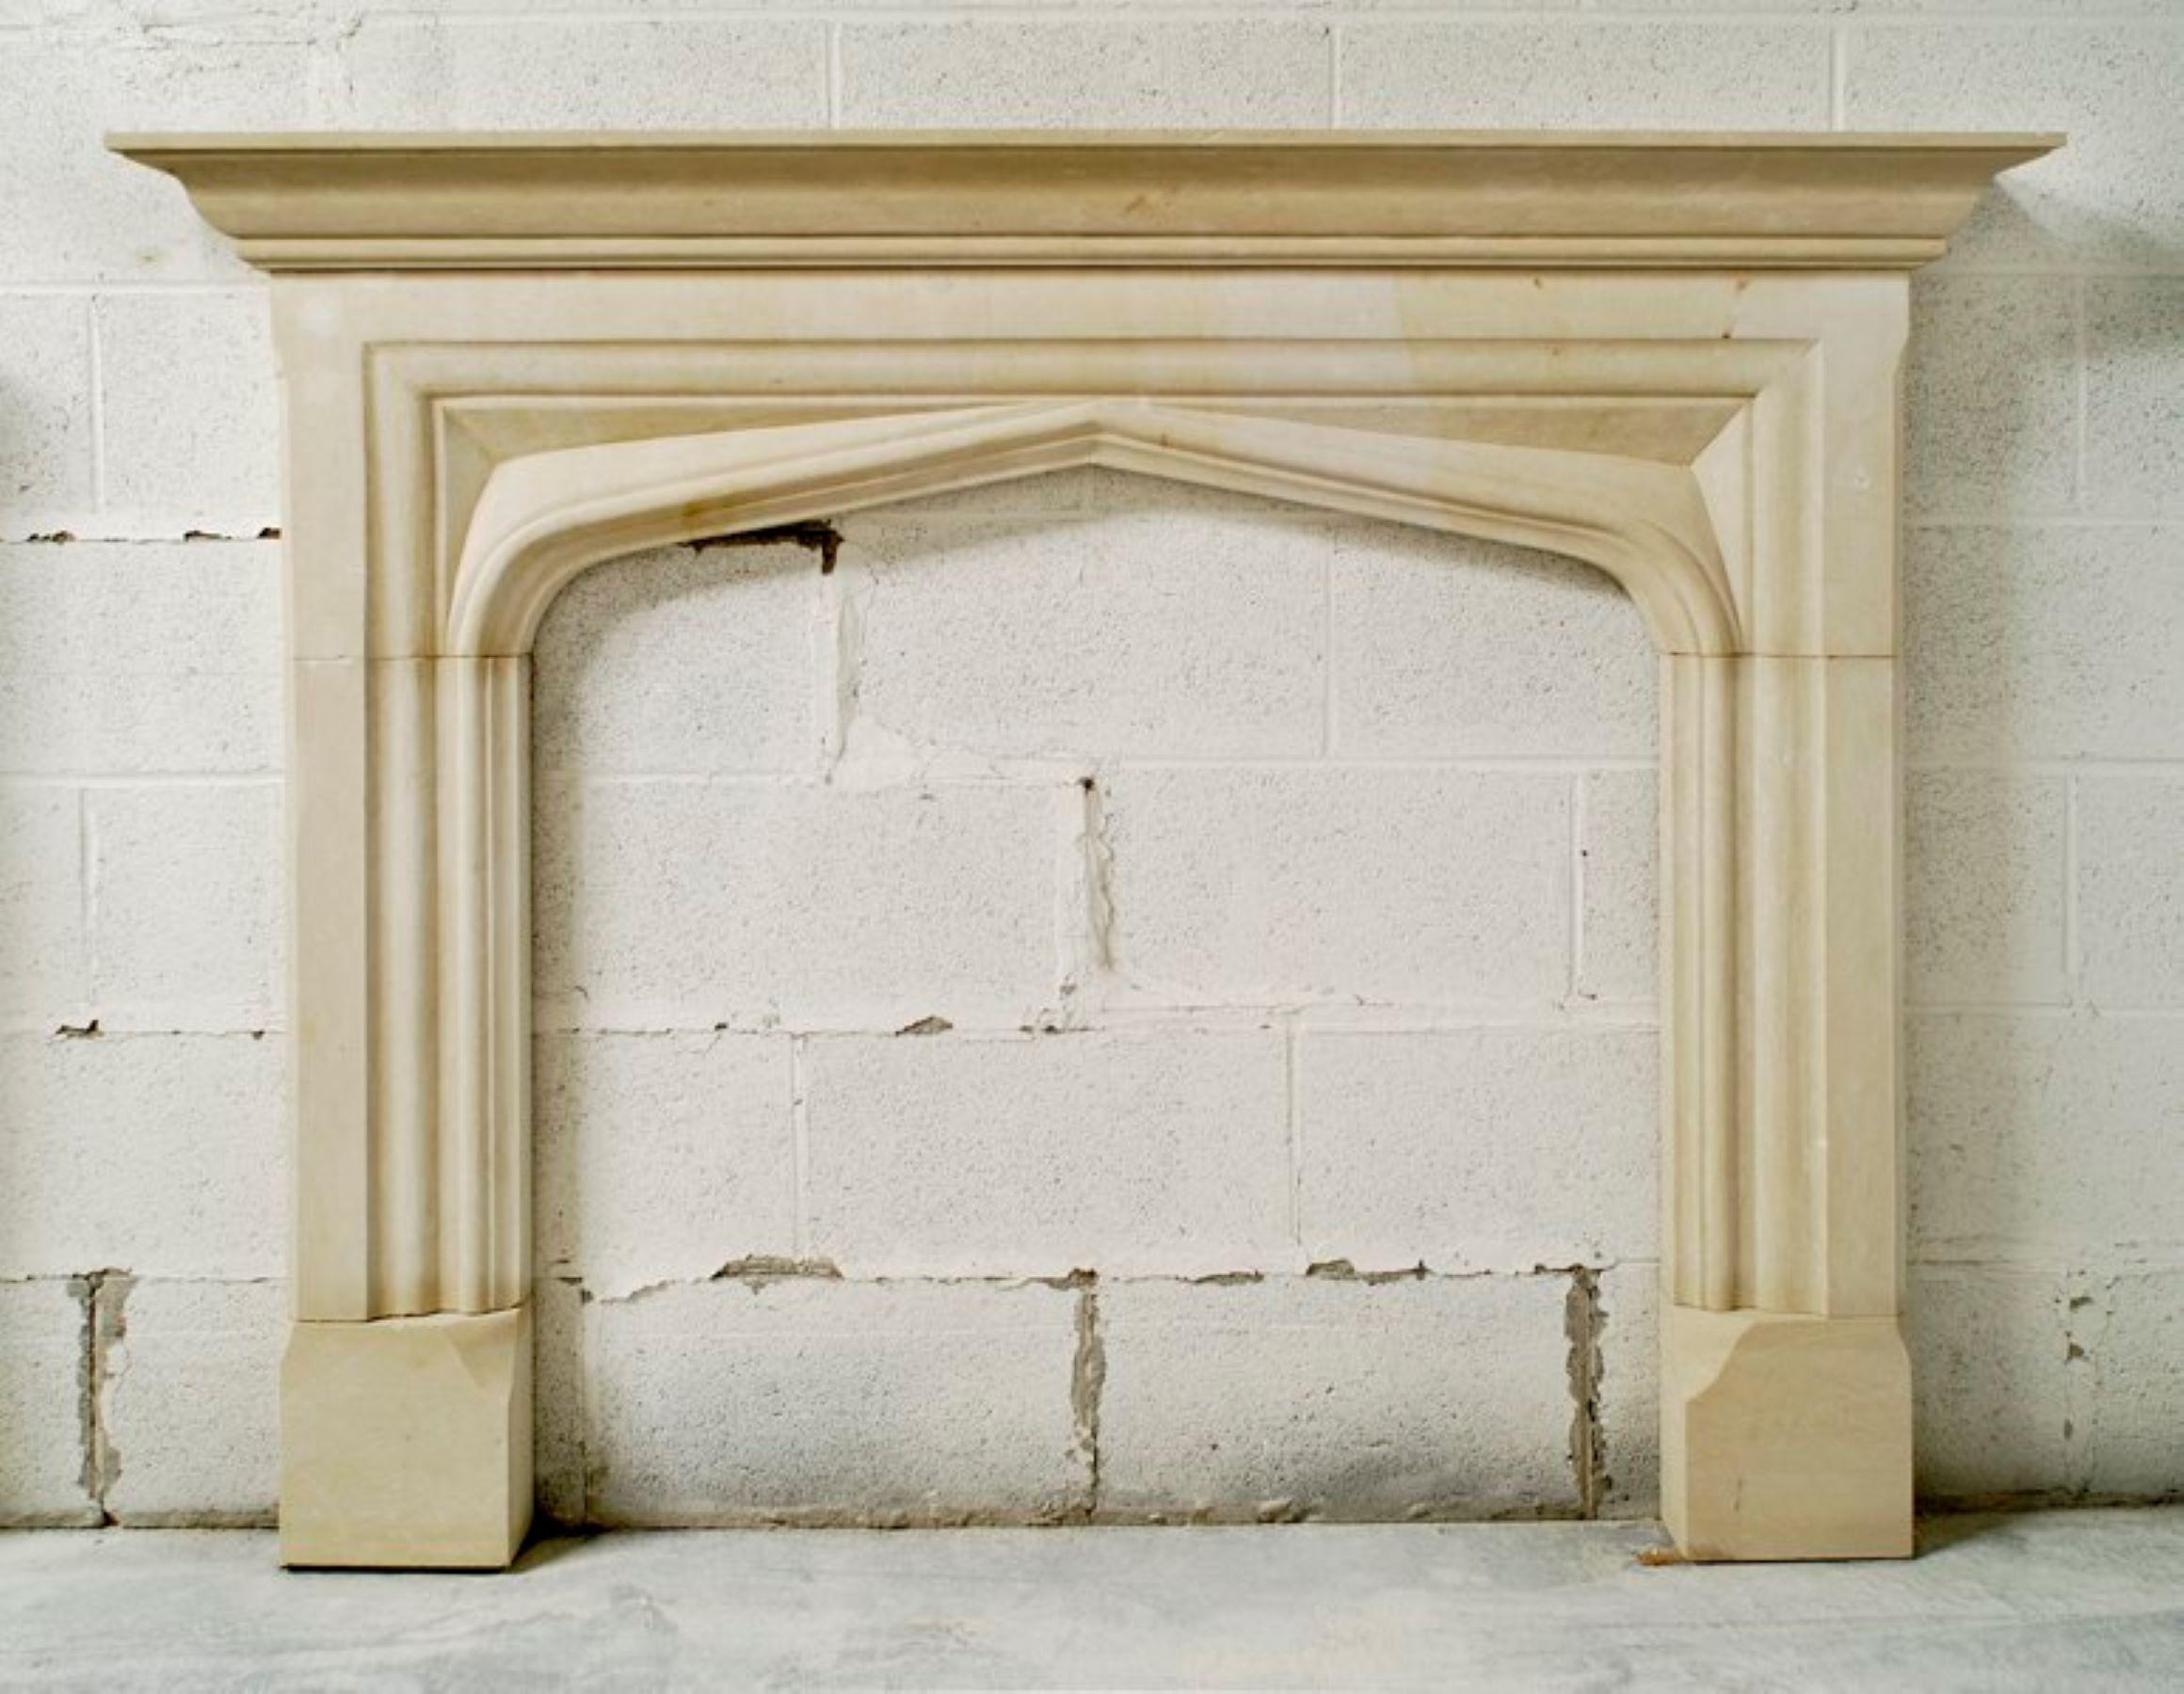 The Stuart stone fireplace, with its traditional peaked arch opening, and triangular spandrels on either side of the arch, evokes the classic 16th century Tudor design era. Our Tudor fireplace starts with block plinths with a slight curved chamfer